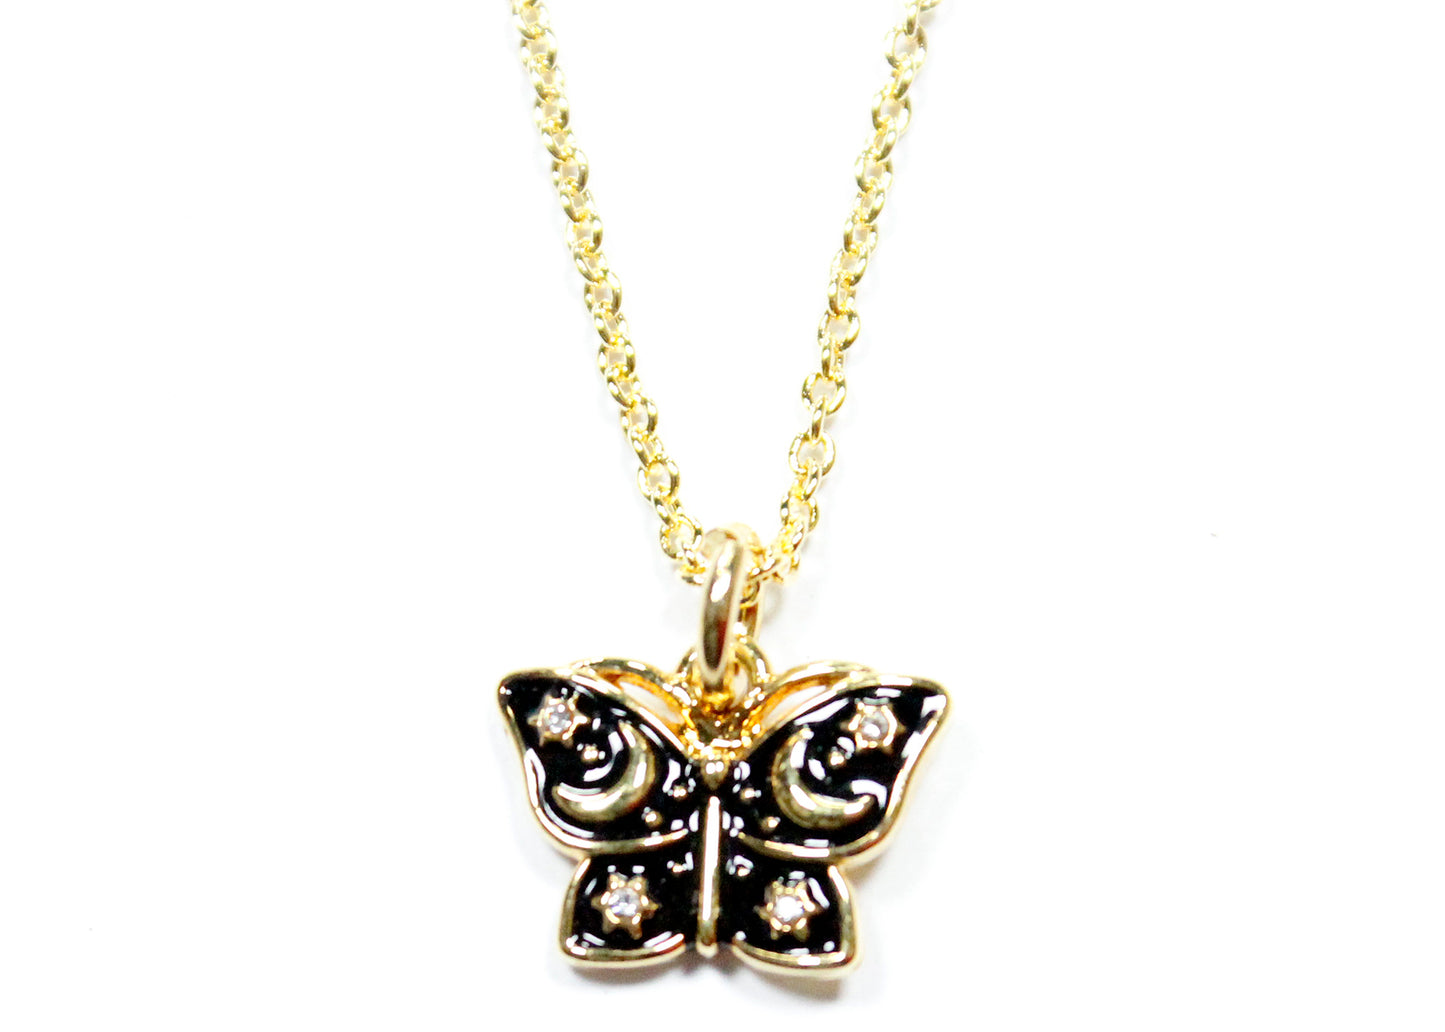 Mystical Butterfly Charm Necklace in Black/Gold